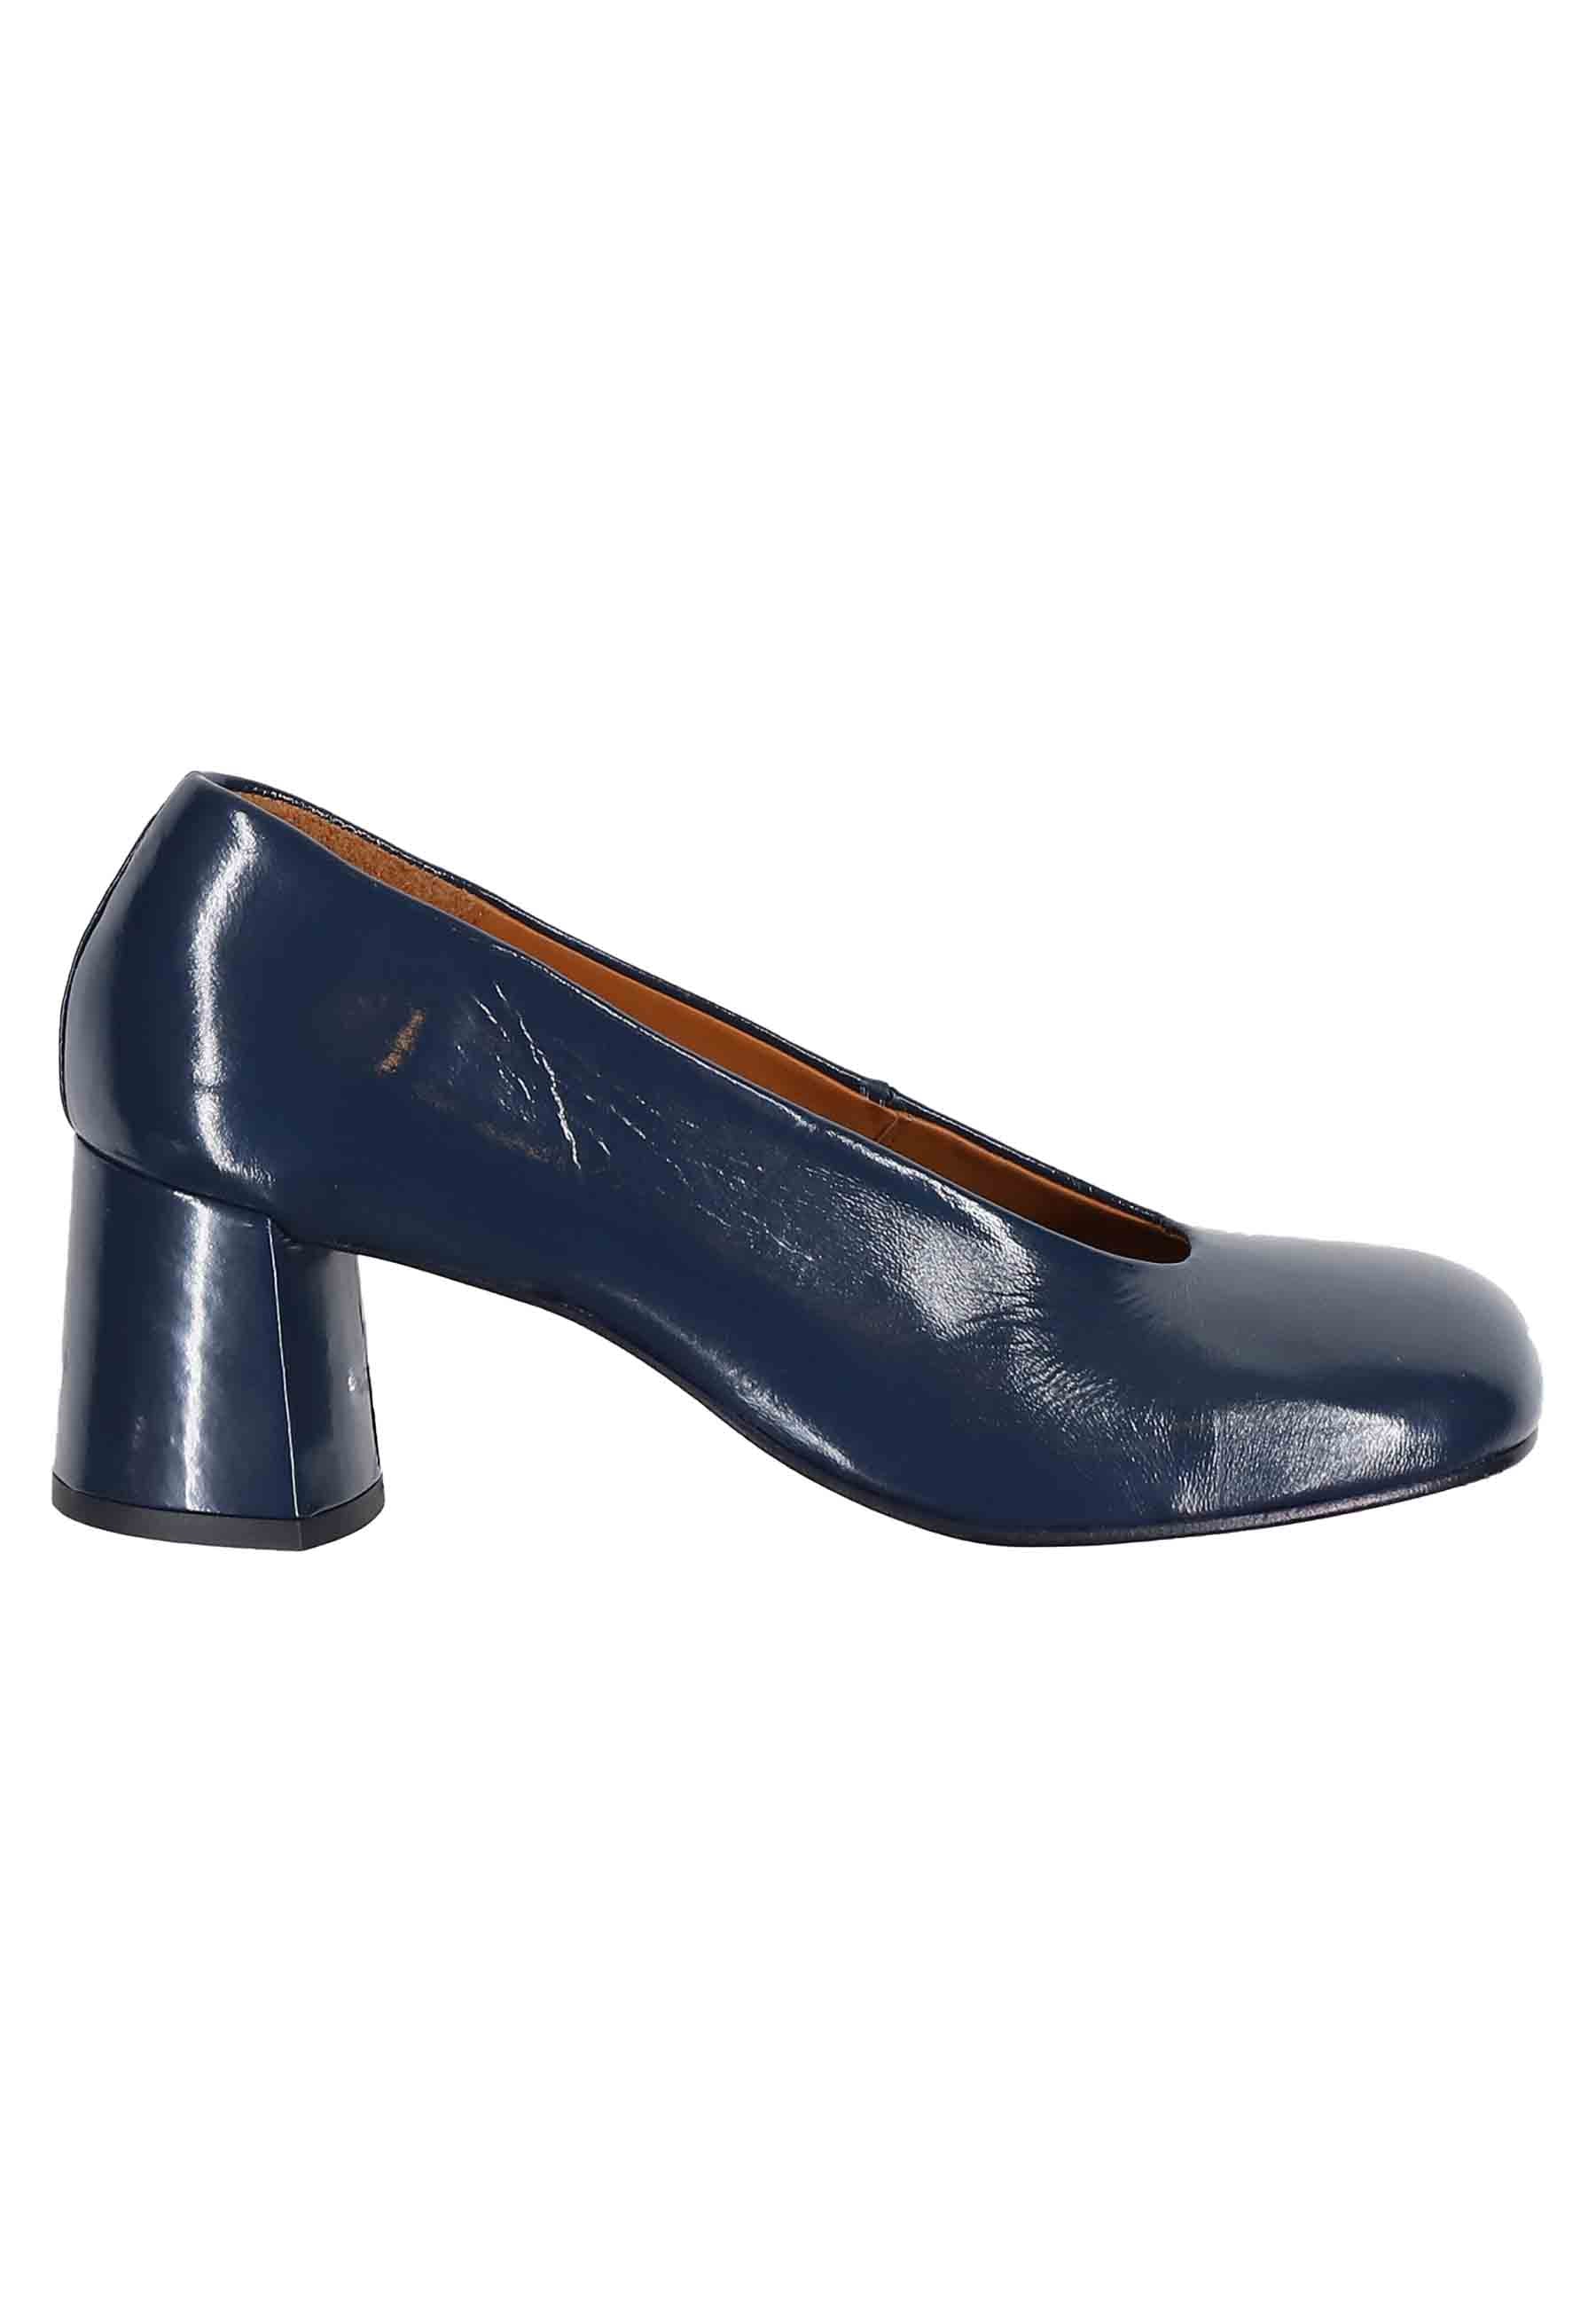 Women's blue leather pumps with round toe